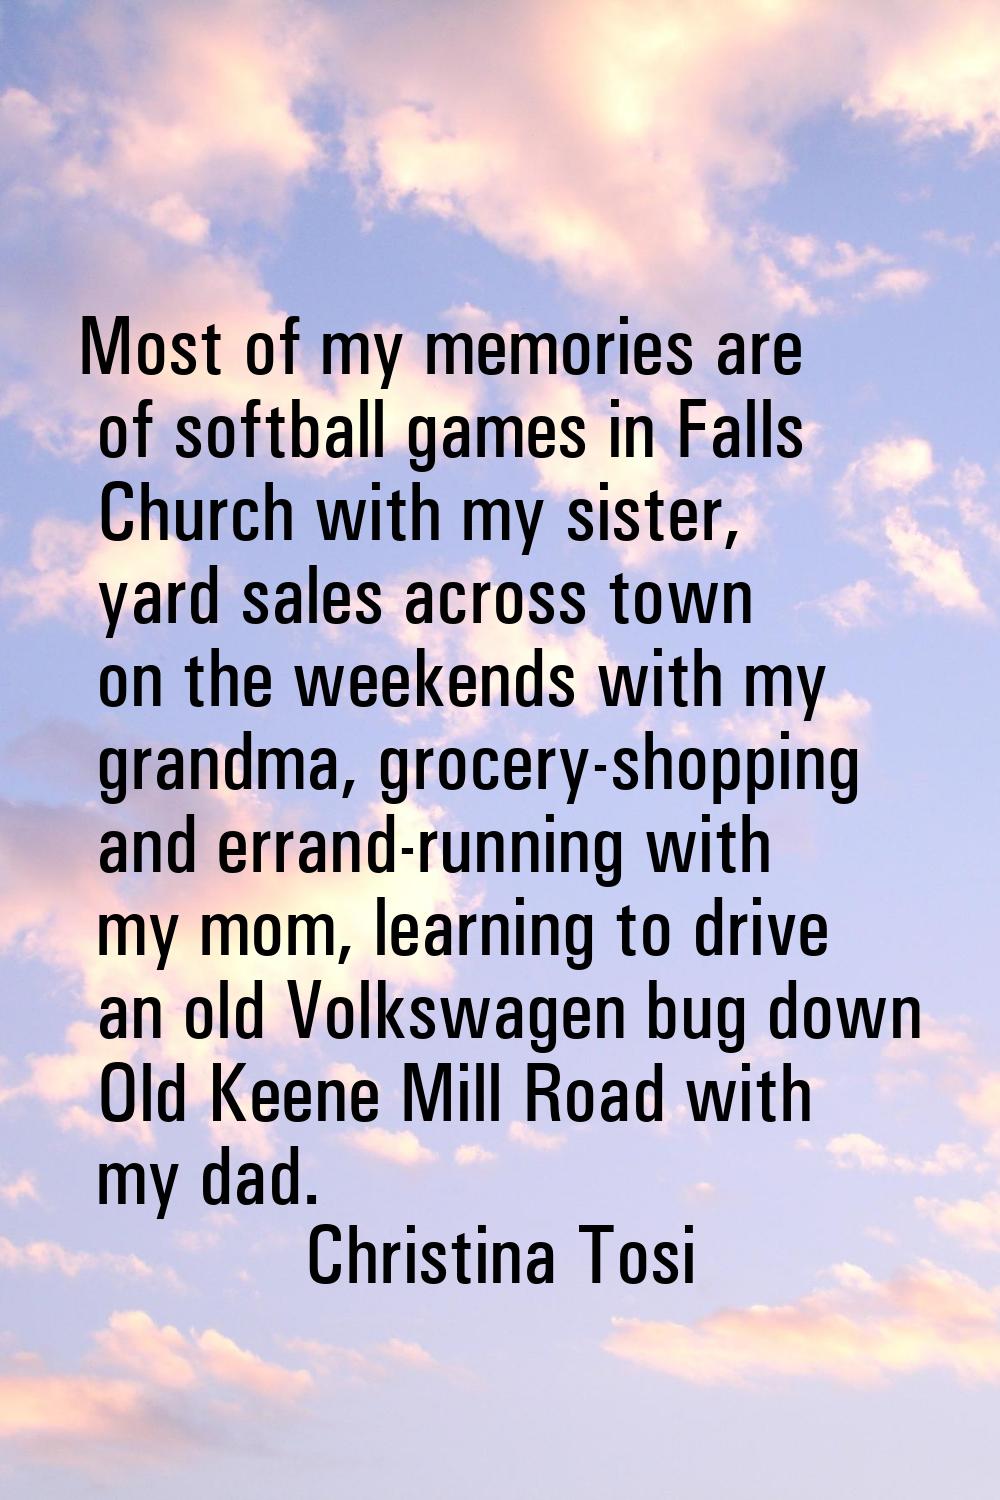 Most of my memories are of softball games in Falls Church with my sister, yard sales across town on